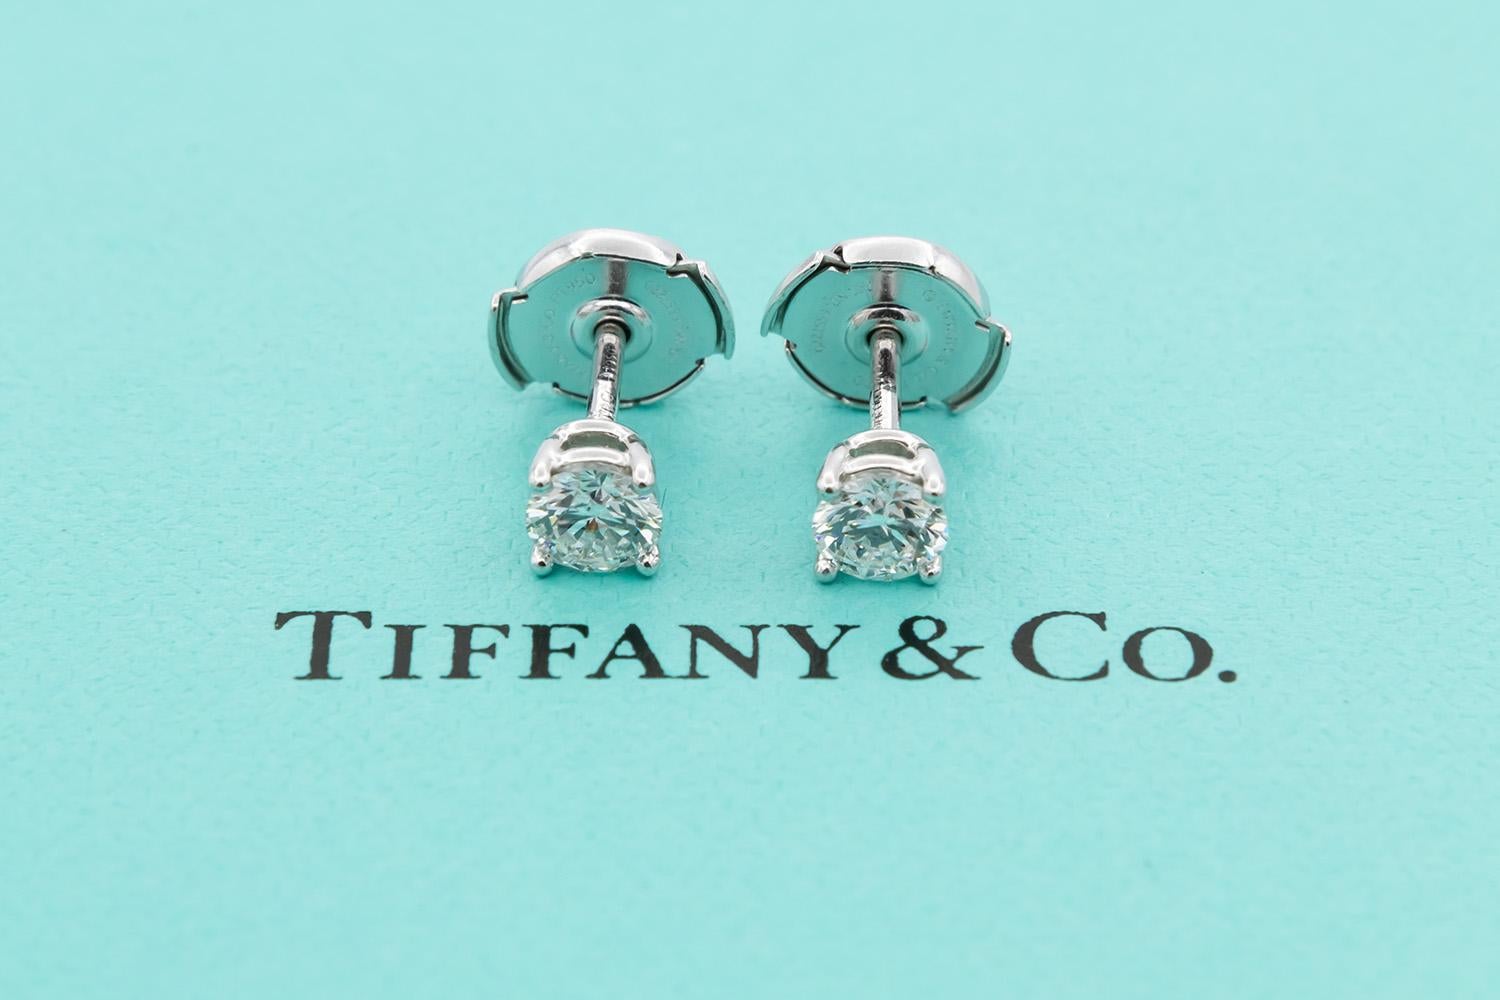 We are pleased to present these Tiffany & Co. Certified and Crown Inscribed Platinum & Round Brilliant Cut Diamond Stud Earrings. These beautiful earrings feature two Tiffany & Co. certified and crown inscribed 0.33ct F/VVS2 Round Brilliant Cut